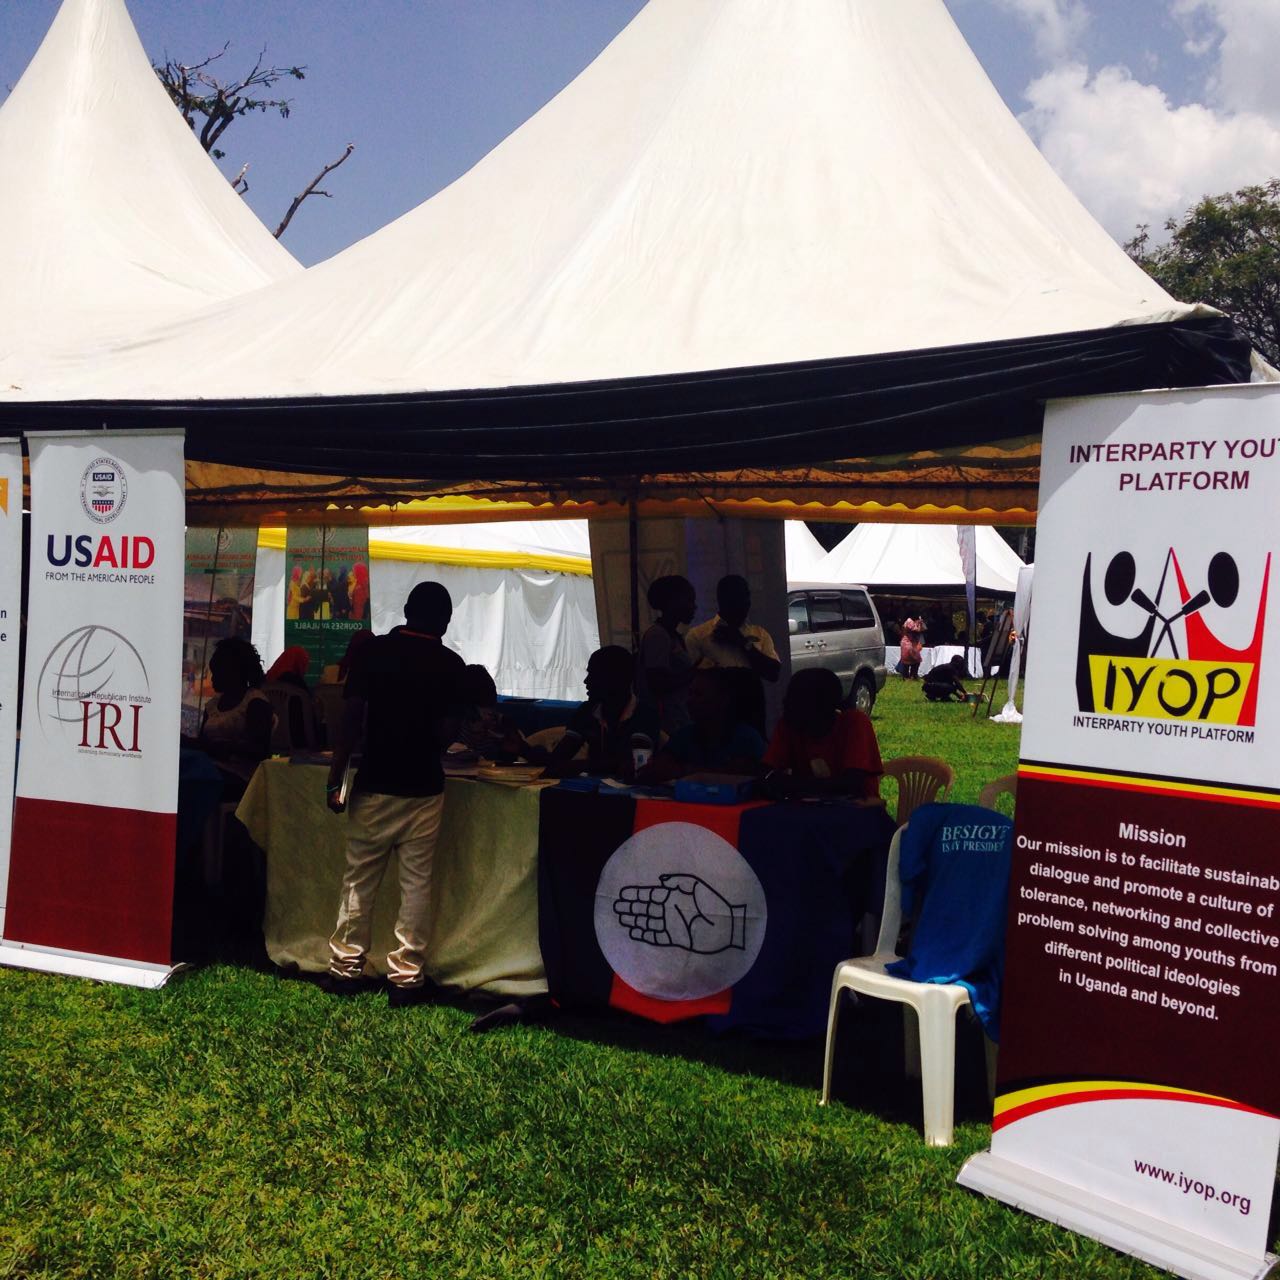 At the festival, IRI, the Uganda Youth Network (UYONET), and IYOP shared connected booths to showcase their work with youth in the political sphere, calling the section Democracy Corner.